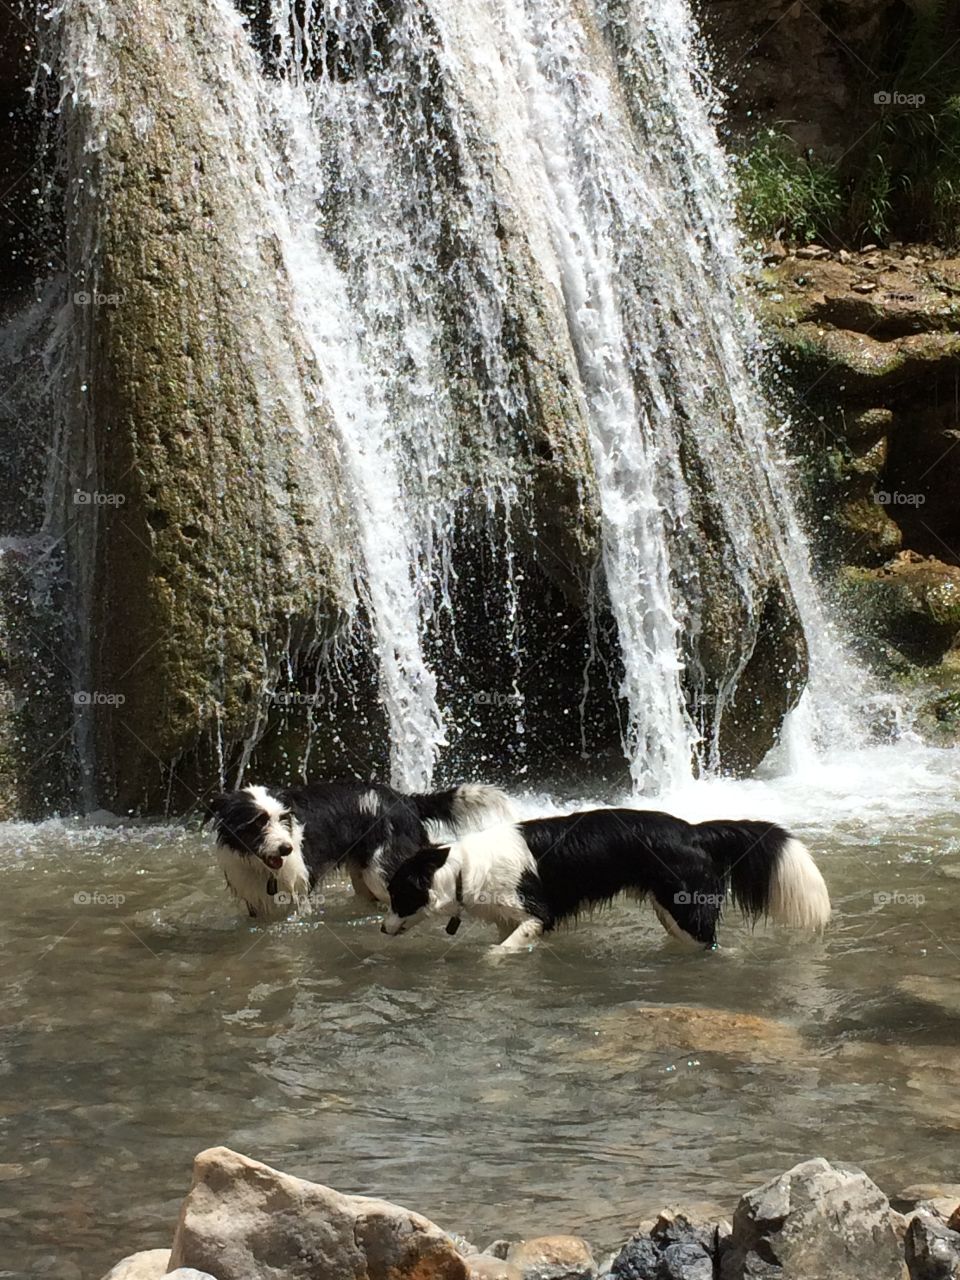 Hot summer day at the waterfall 